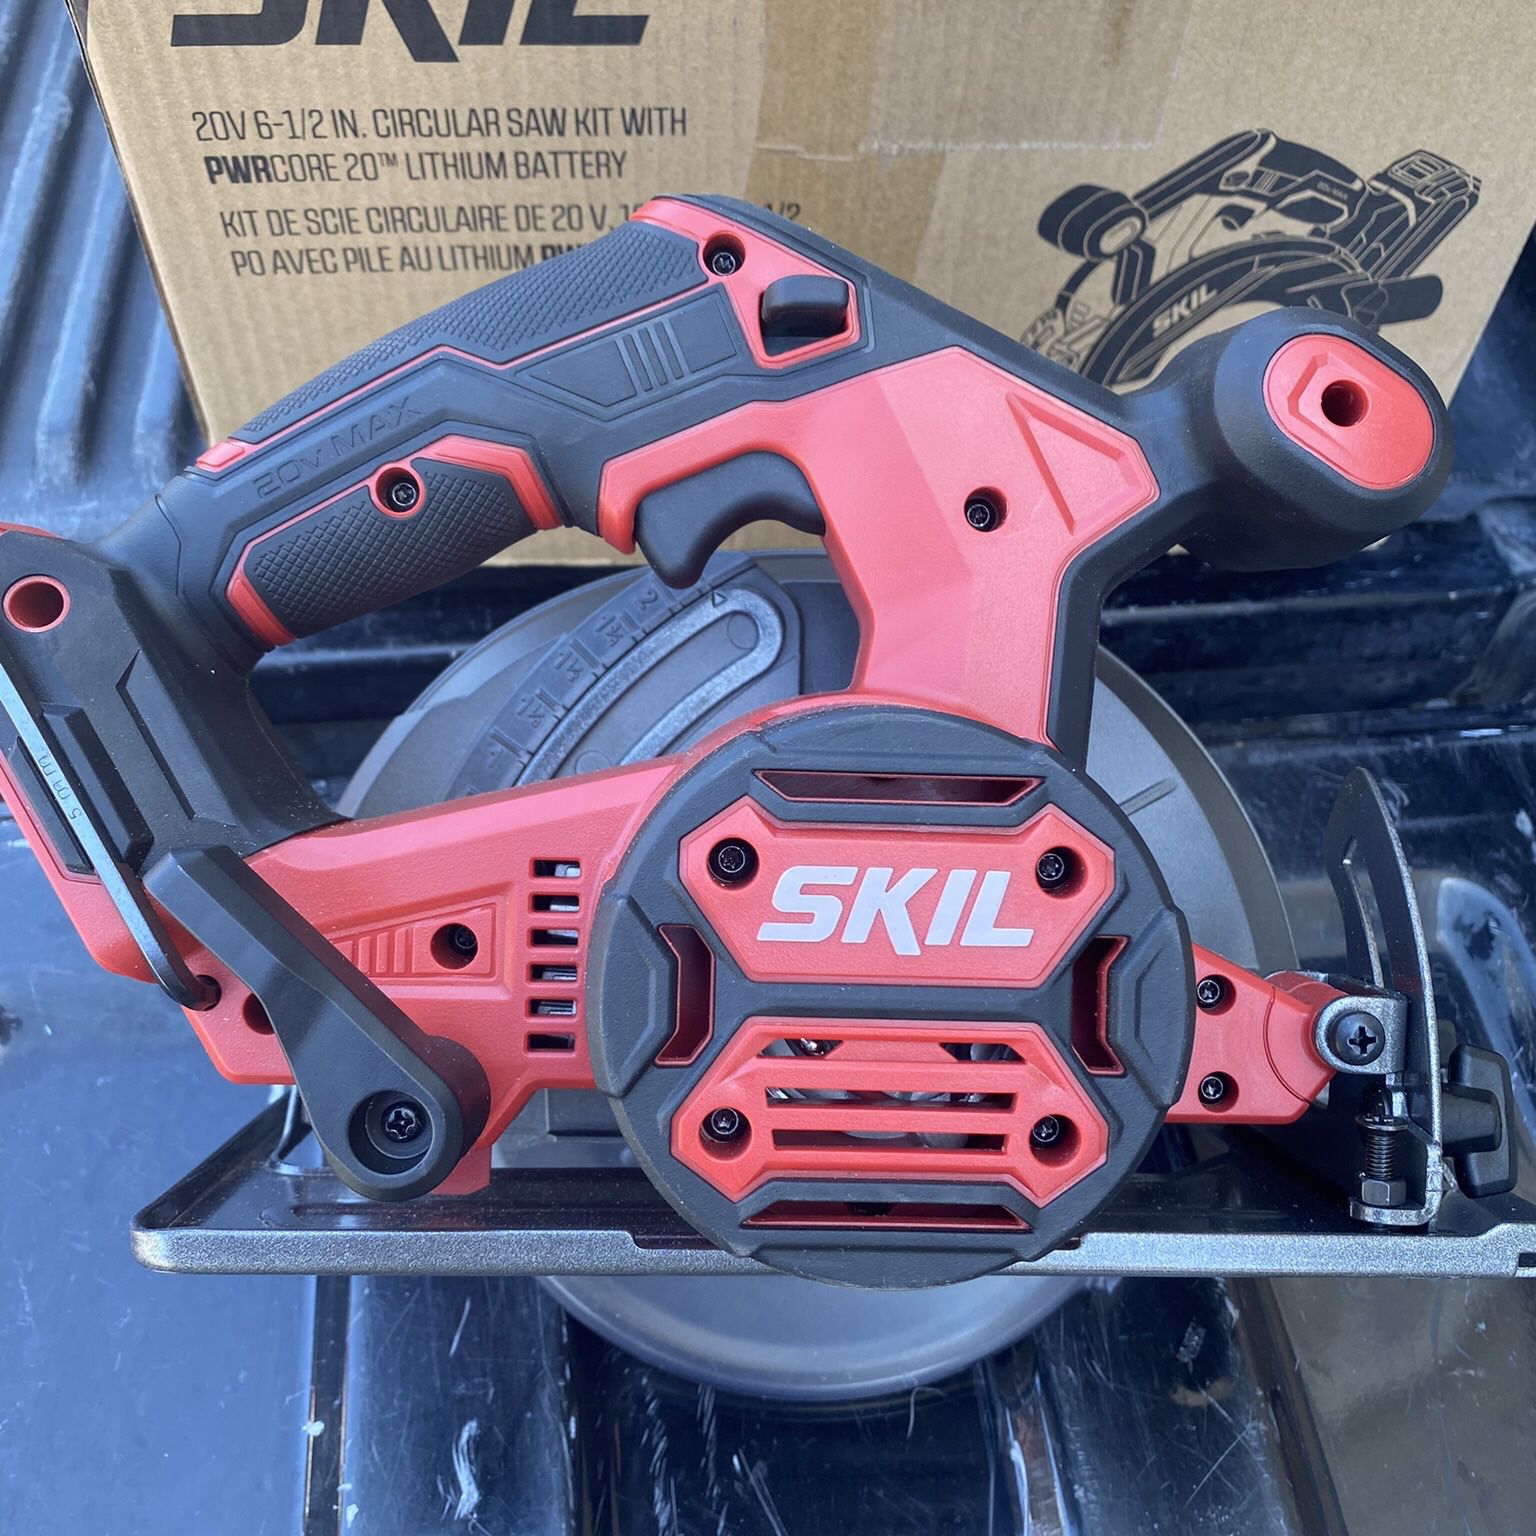 SKIL 20V 6-1/2 Inch Circular Saw with LED Light, Tool Only CR540601 for  Sale in Las Vegas, NV OfferUp